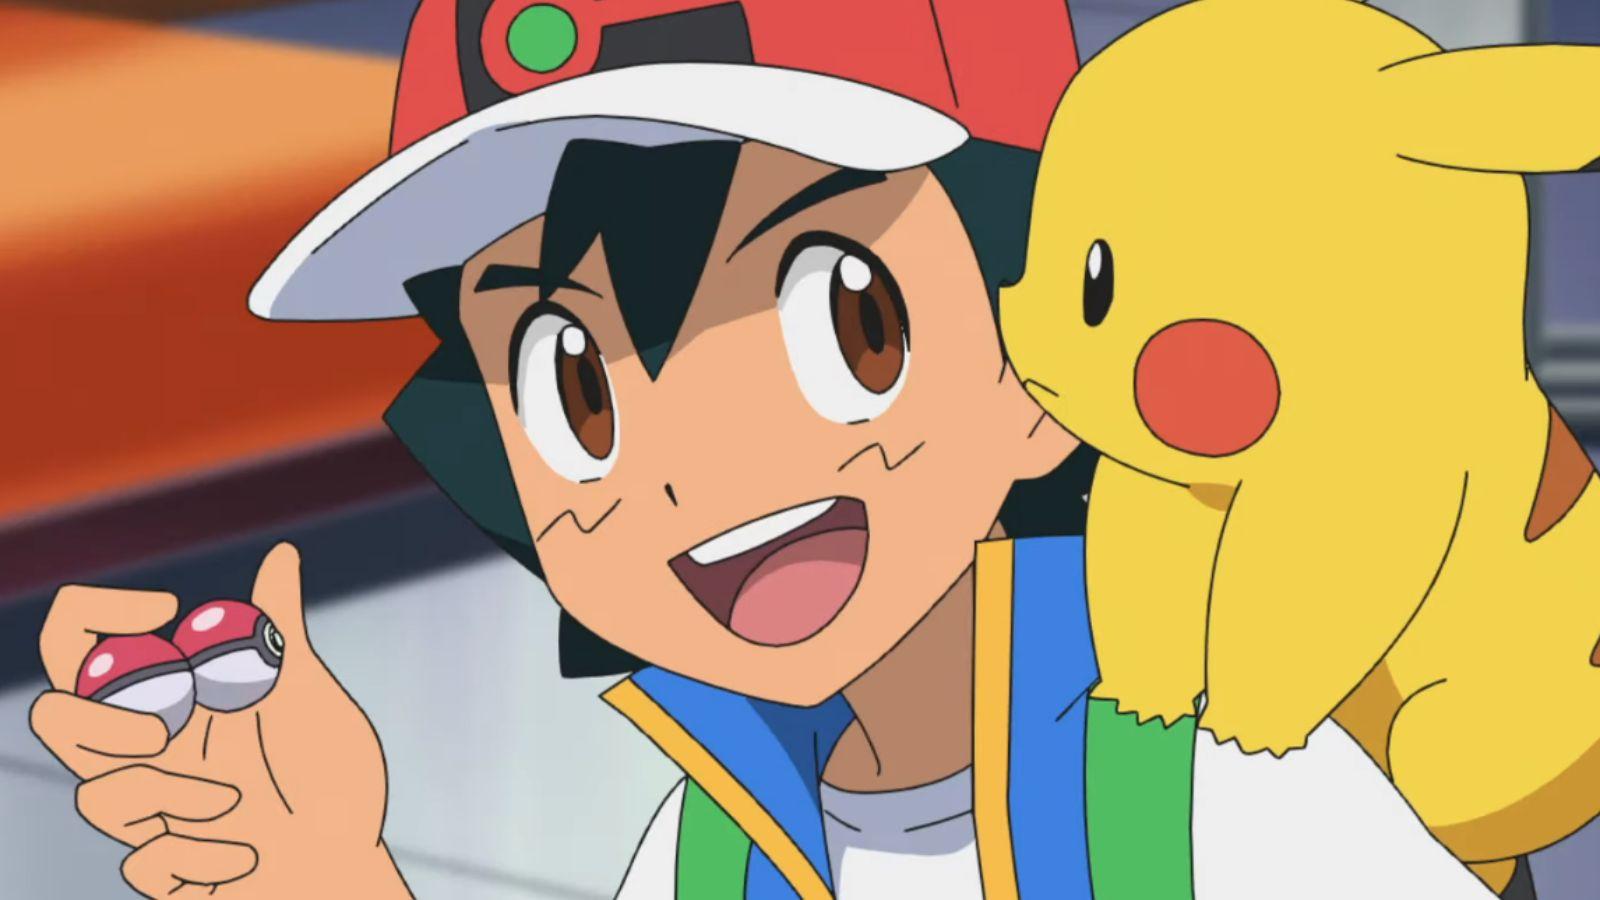 Why Ash's Pikachu will never evolve in the Pokemon anime - Dexerto